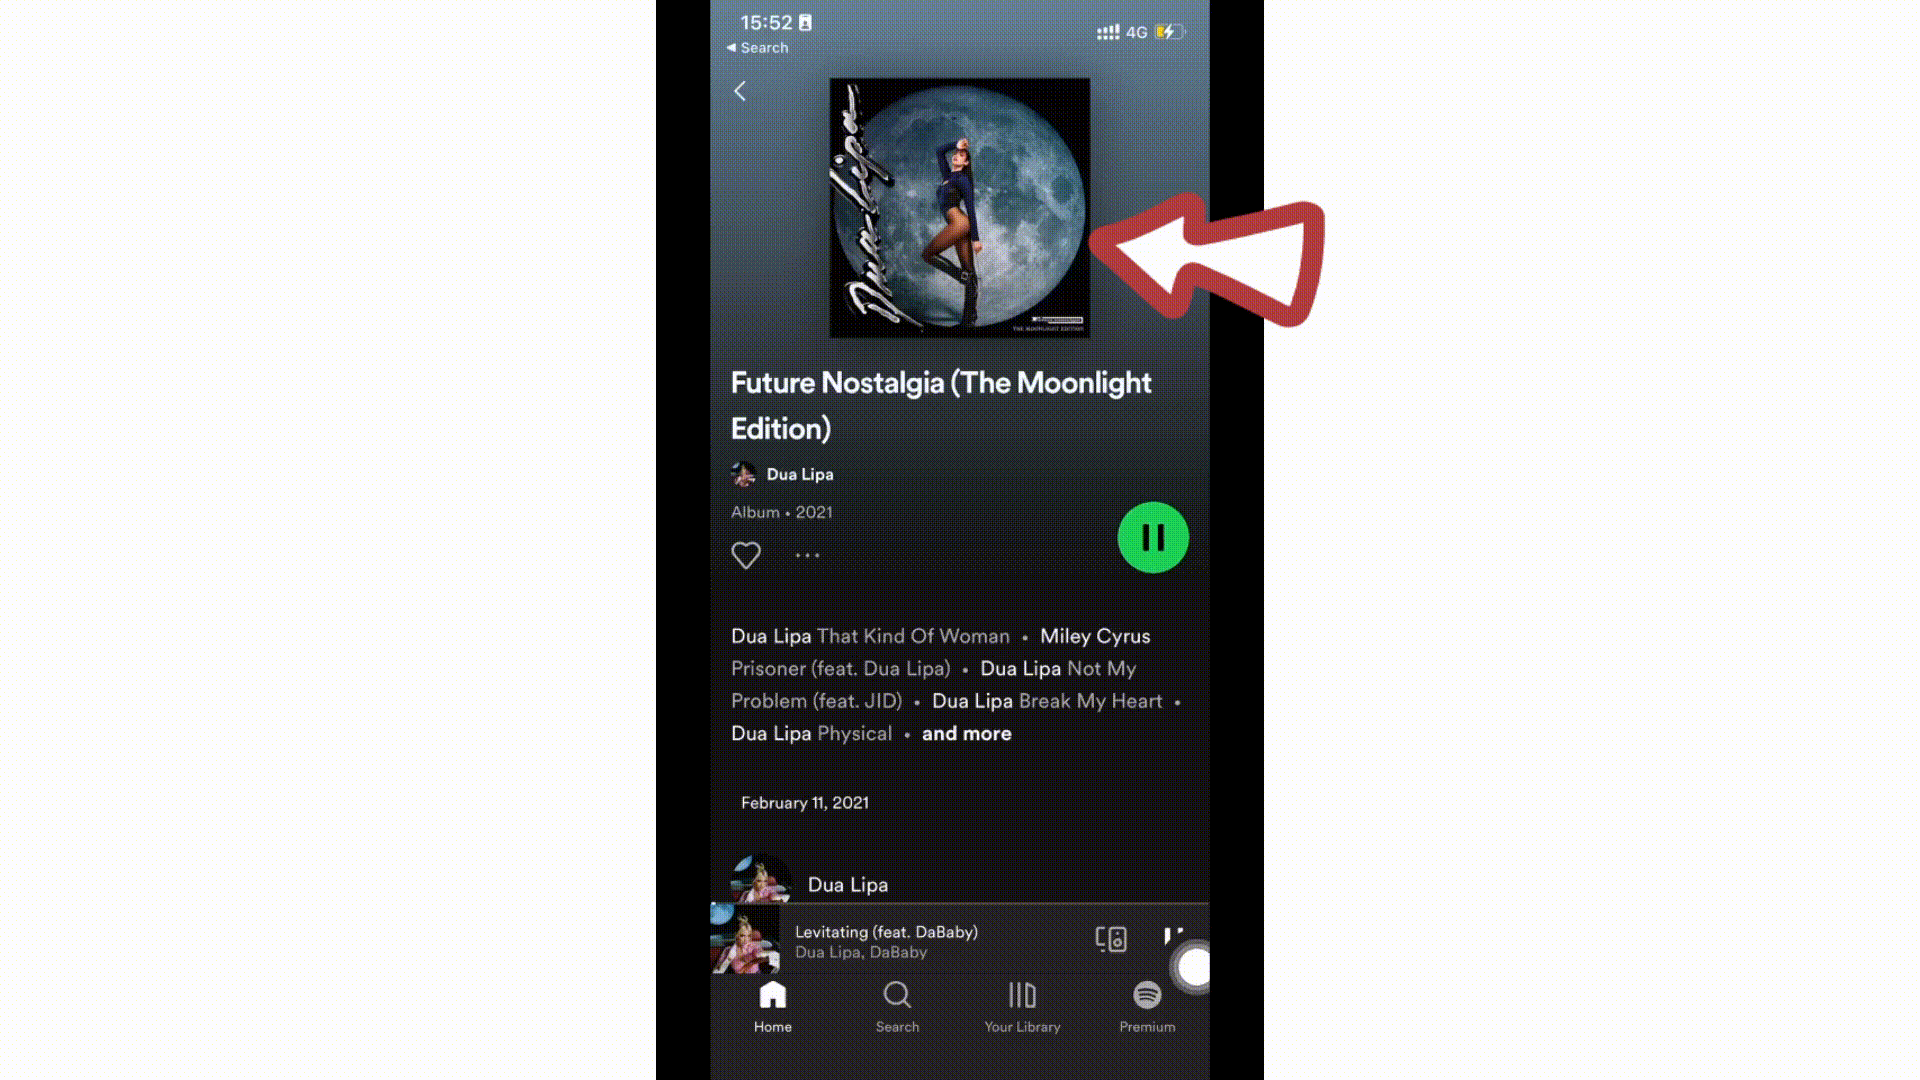 capture spotify album cover art on phone